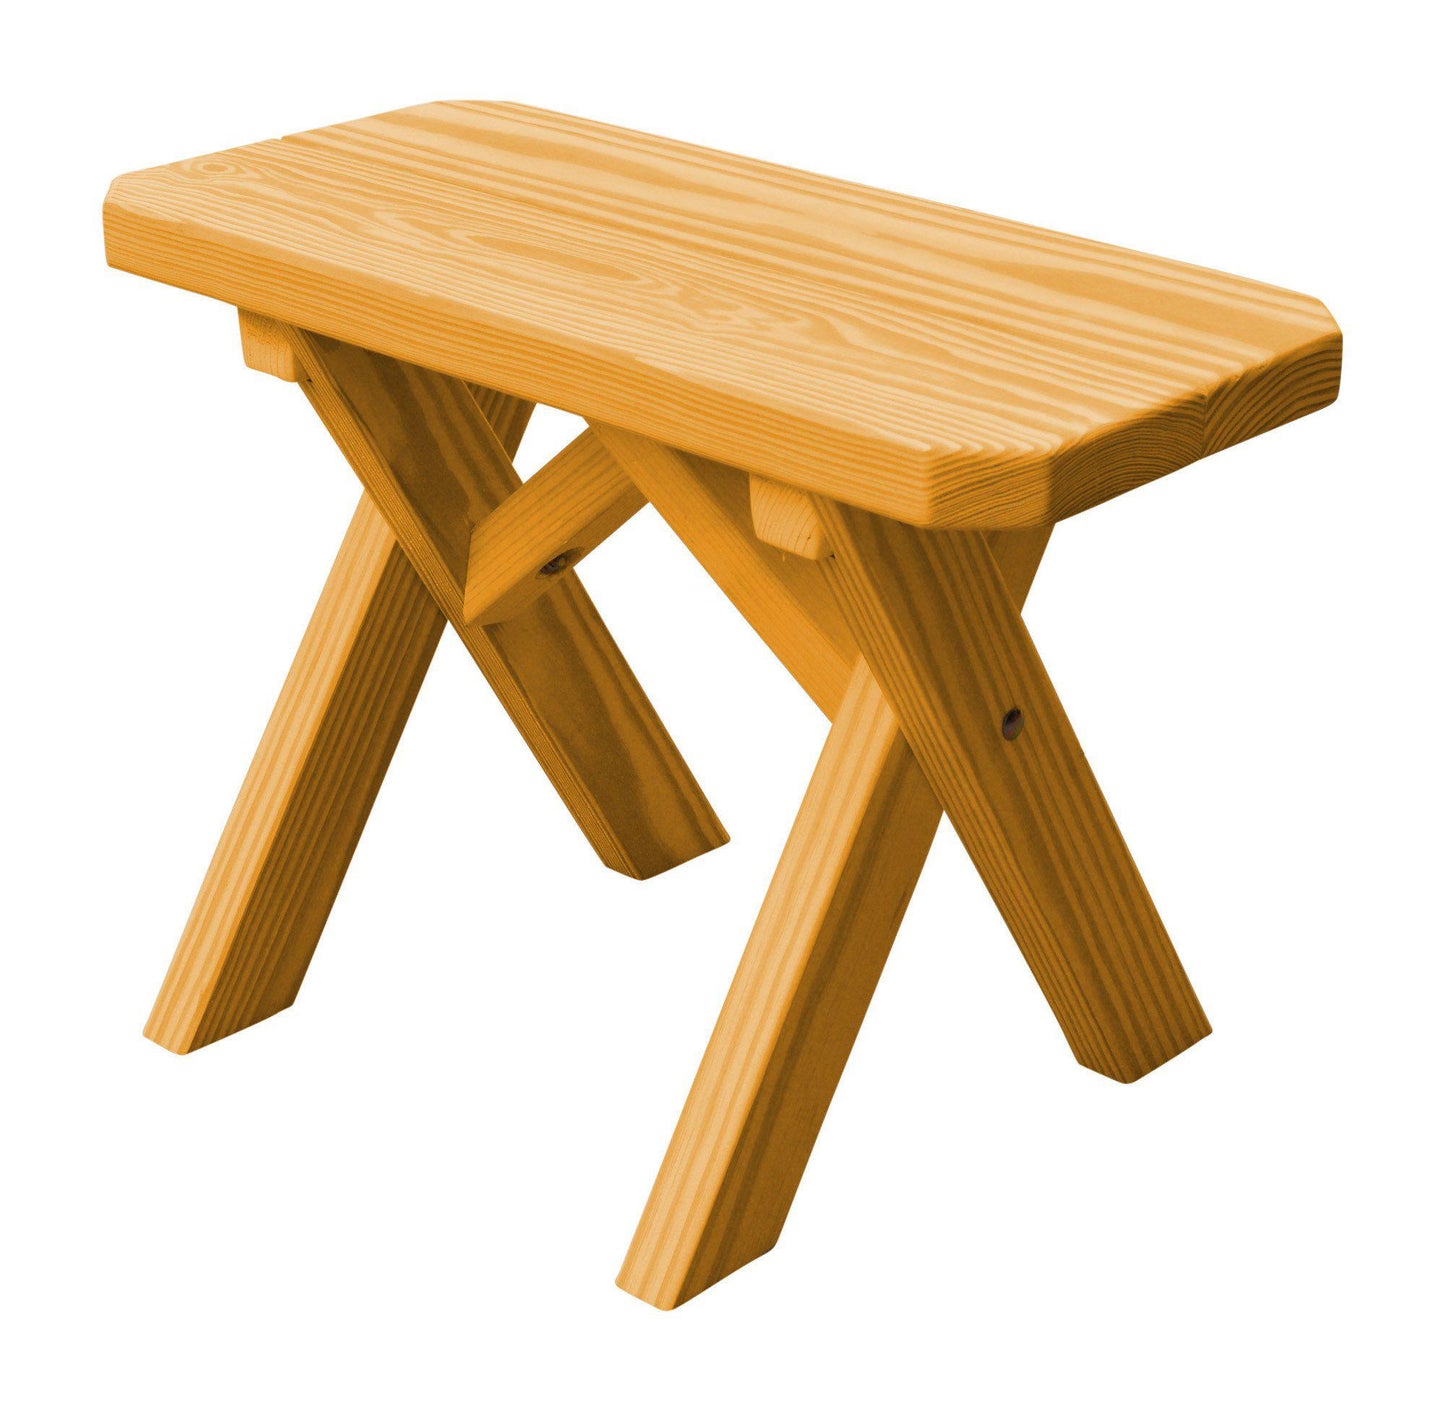 A&L Furniture Co. Pressure Treated Pine 23" Crossleg Bench Only - LEAD TIME TO SHIP 10 BUSINESS DAYS